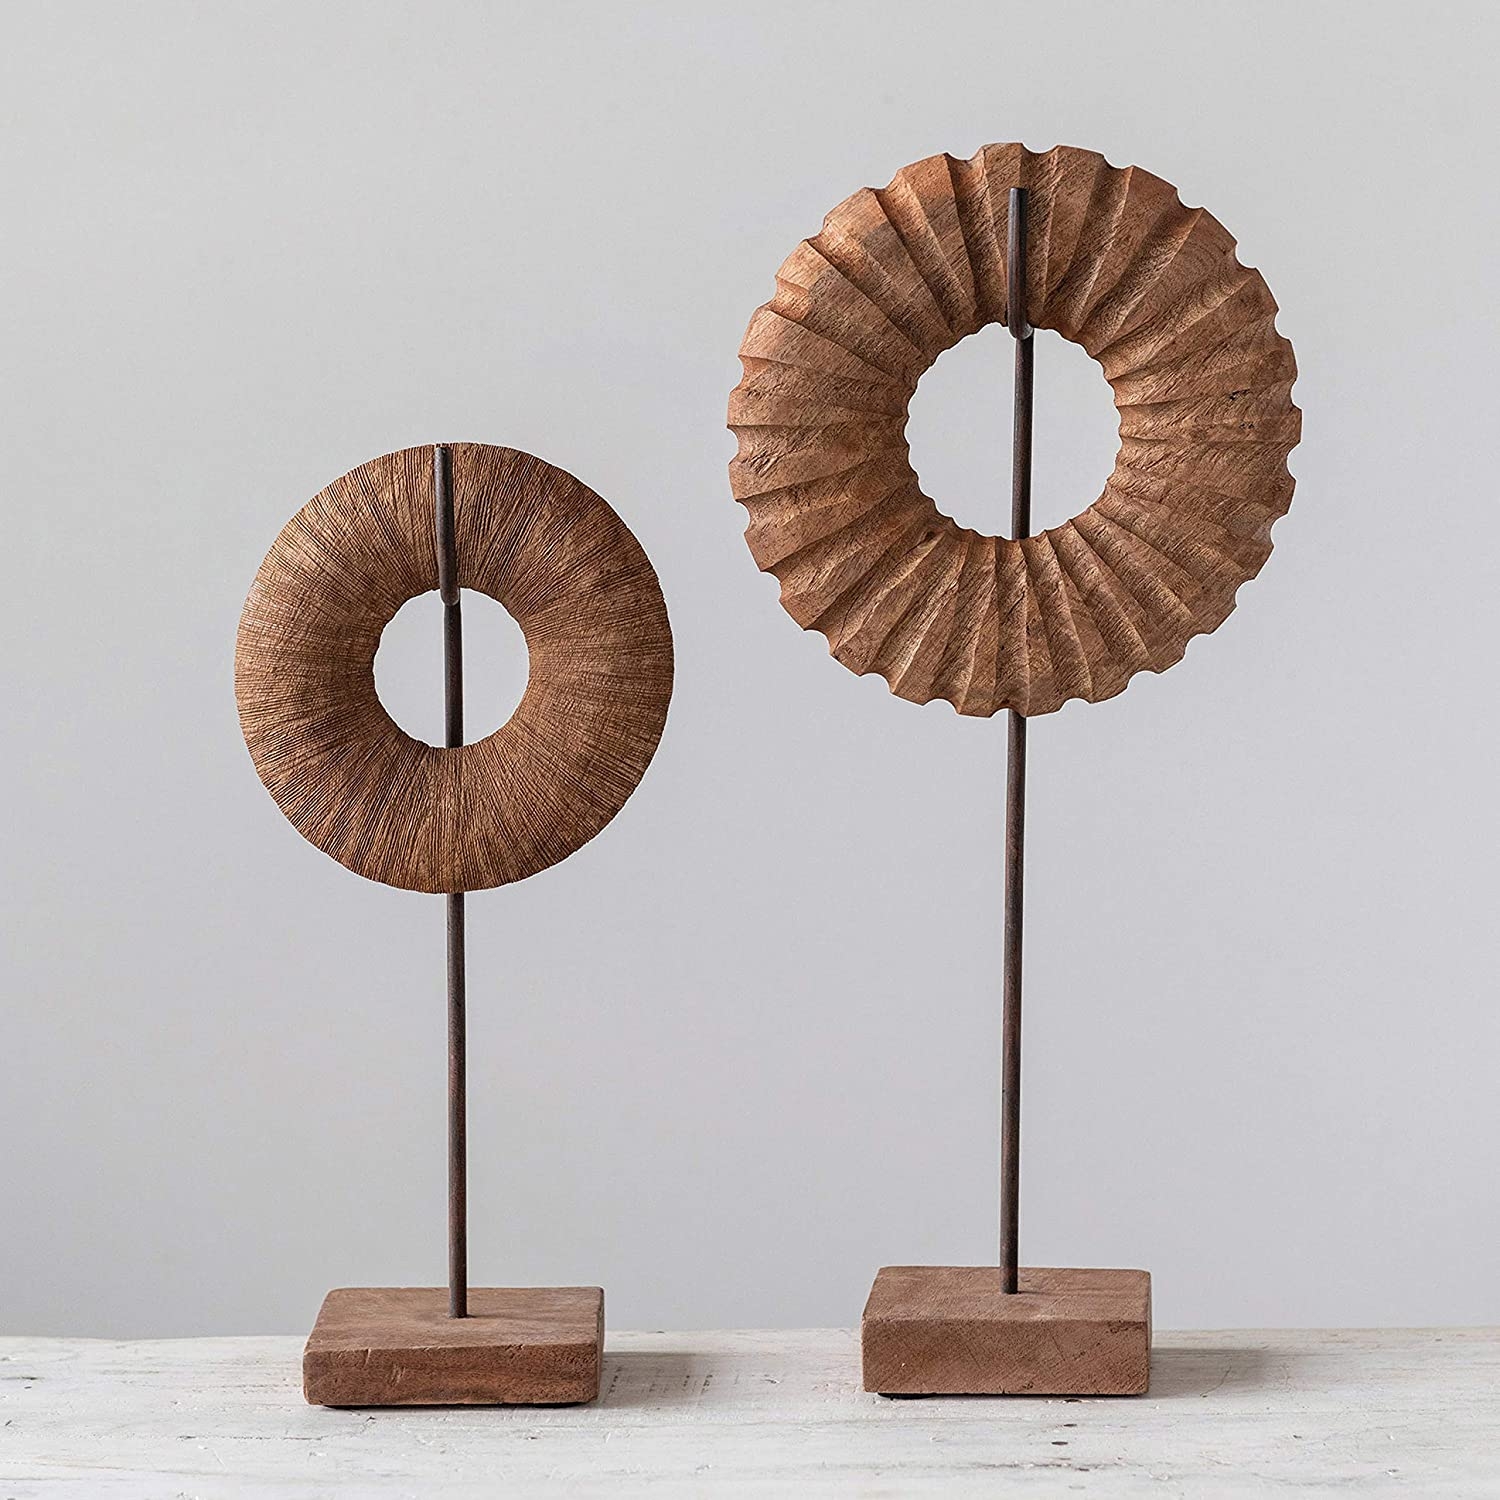 Hand-Carved Mango Wood Circle Object on Metal & Wood Stand, Set of 2 - Image 0